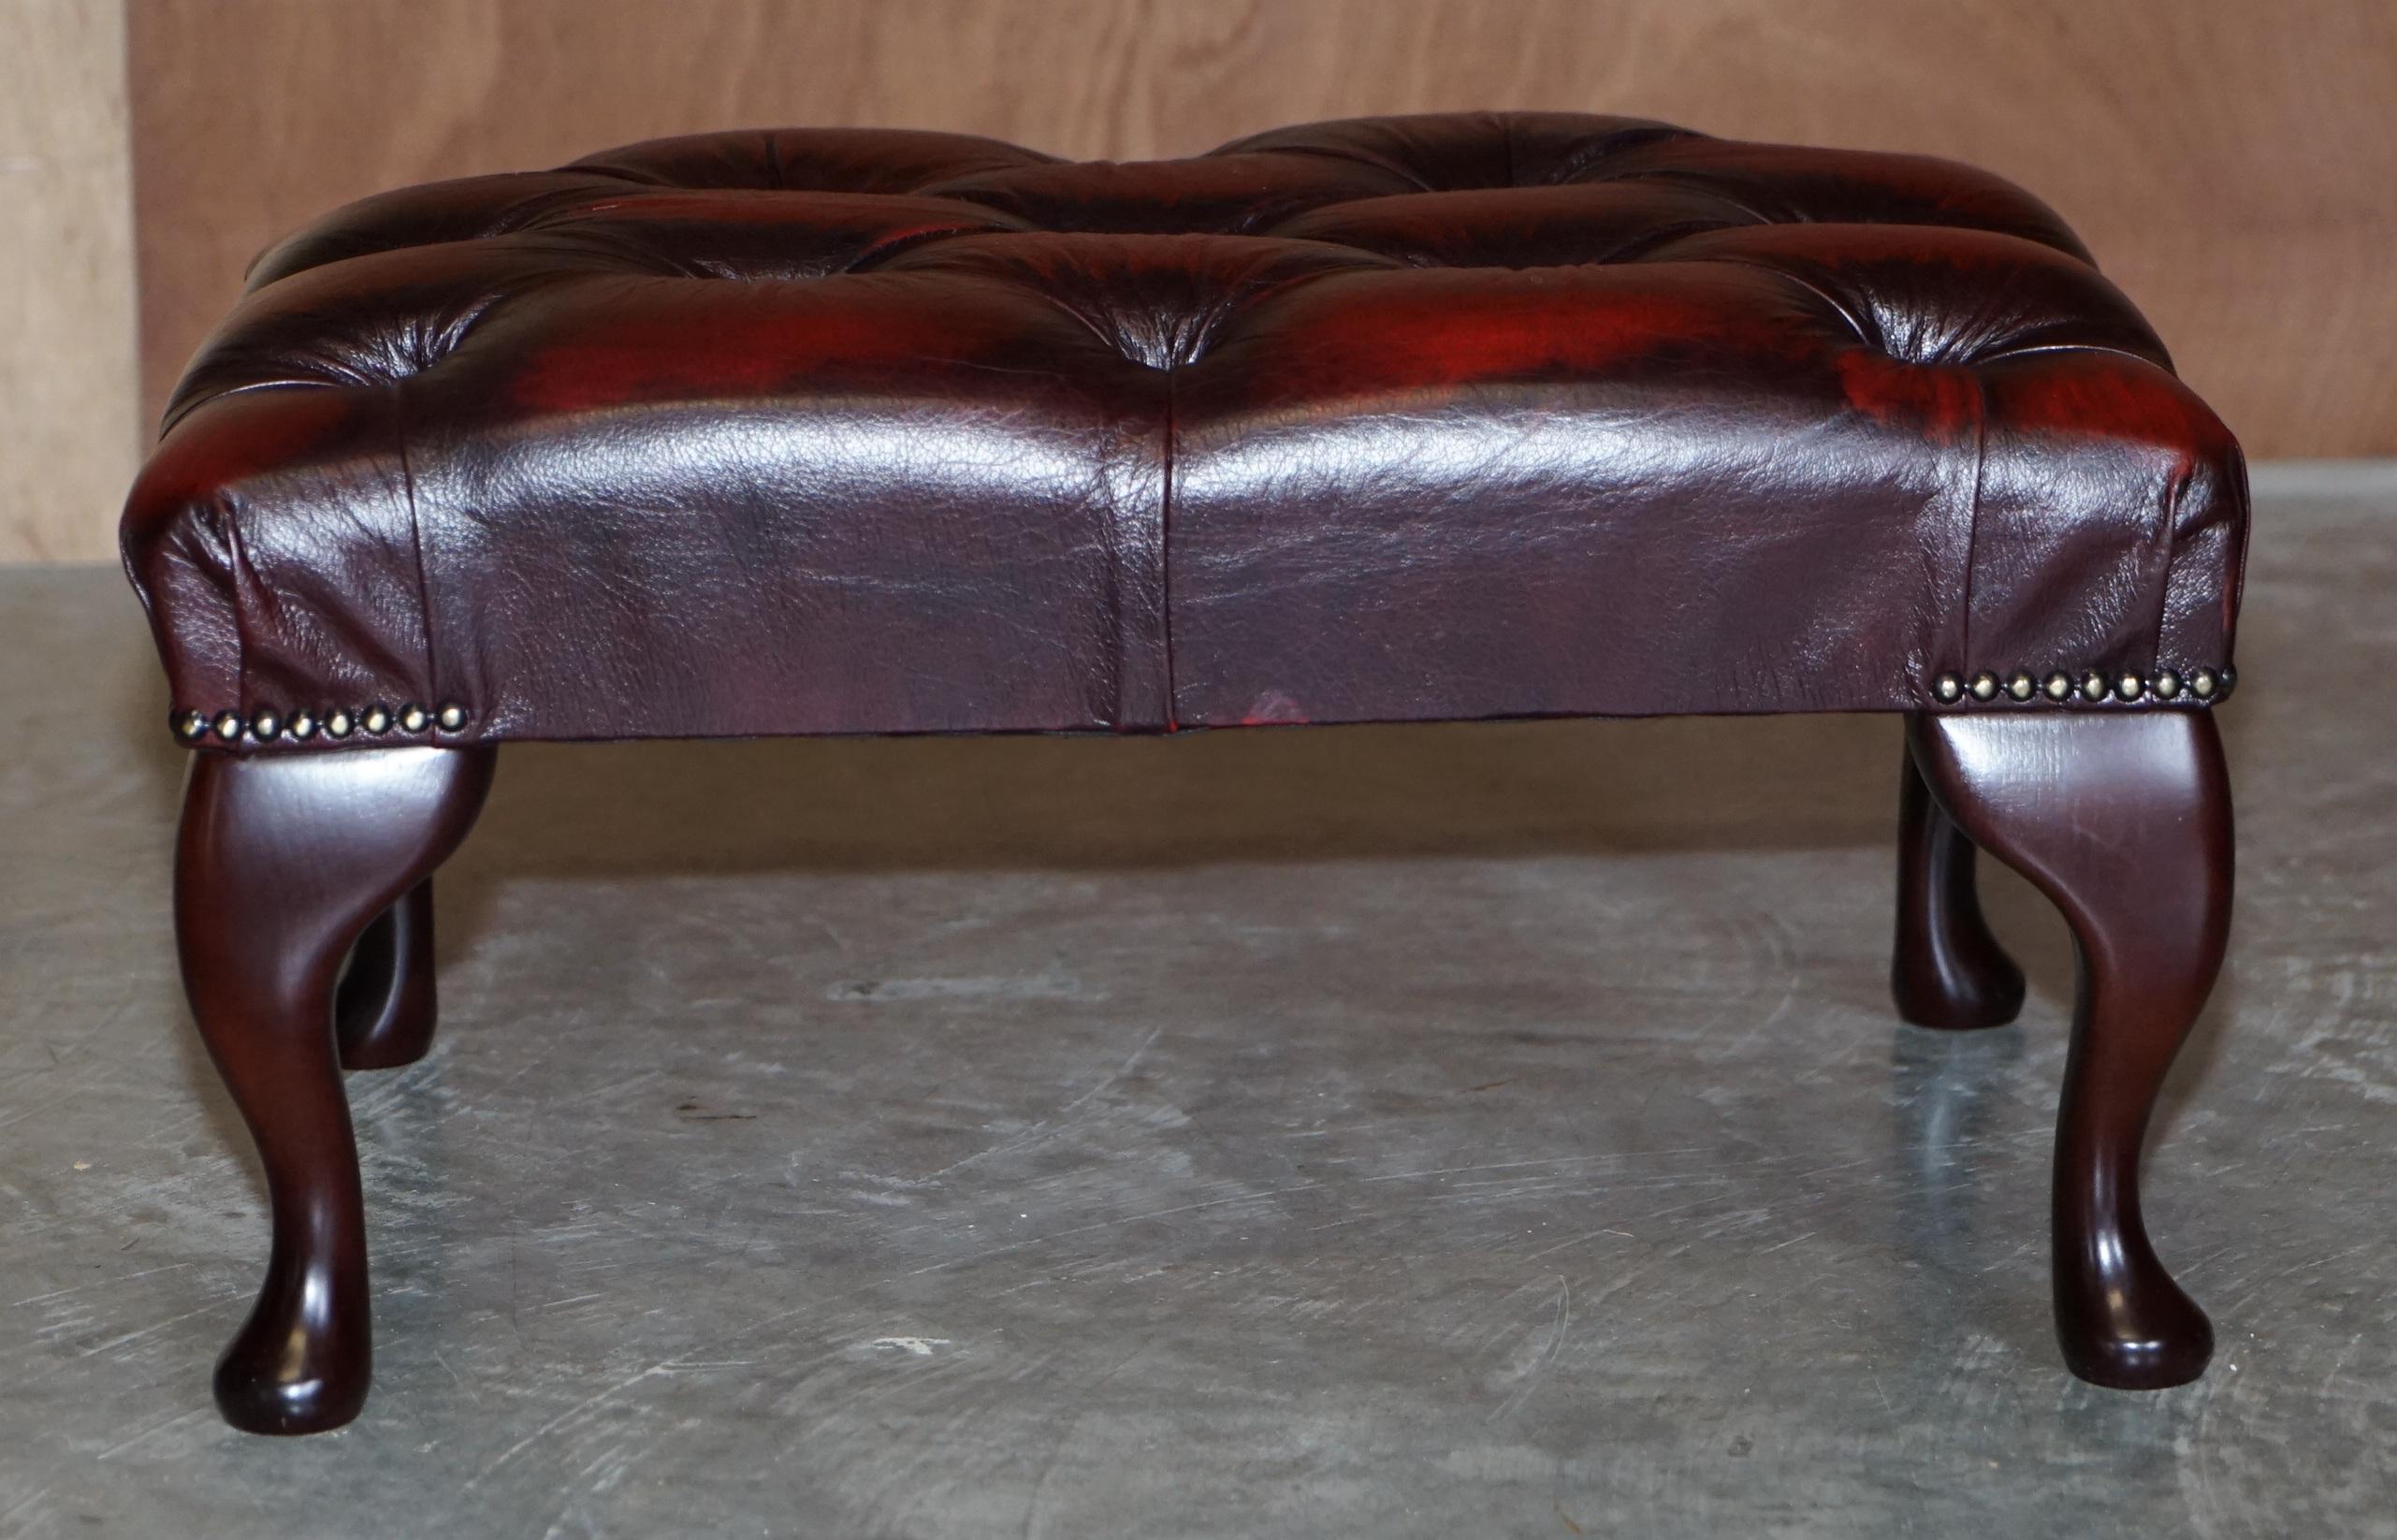 English Lovely Oxblood Leather Chesterfield Footstool Ottoman Beech Wood Cabriolet Legs